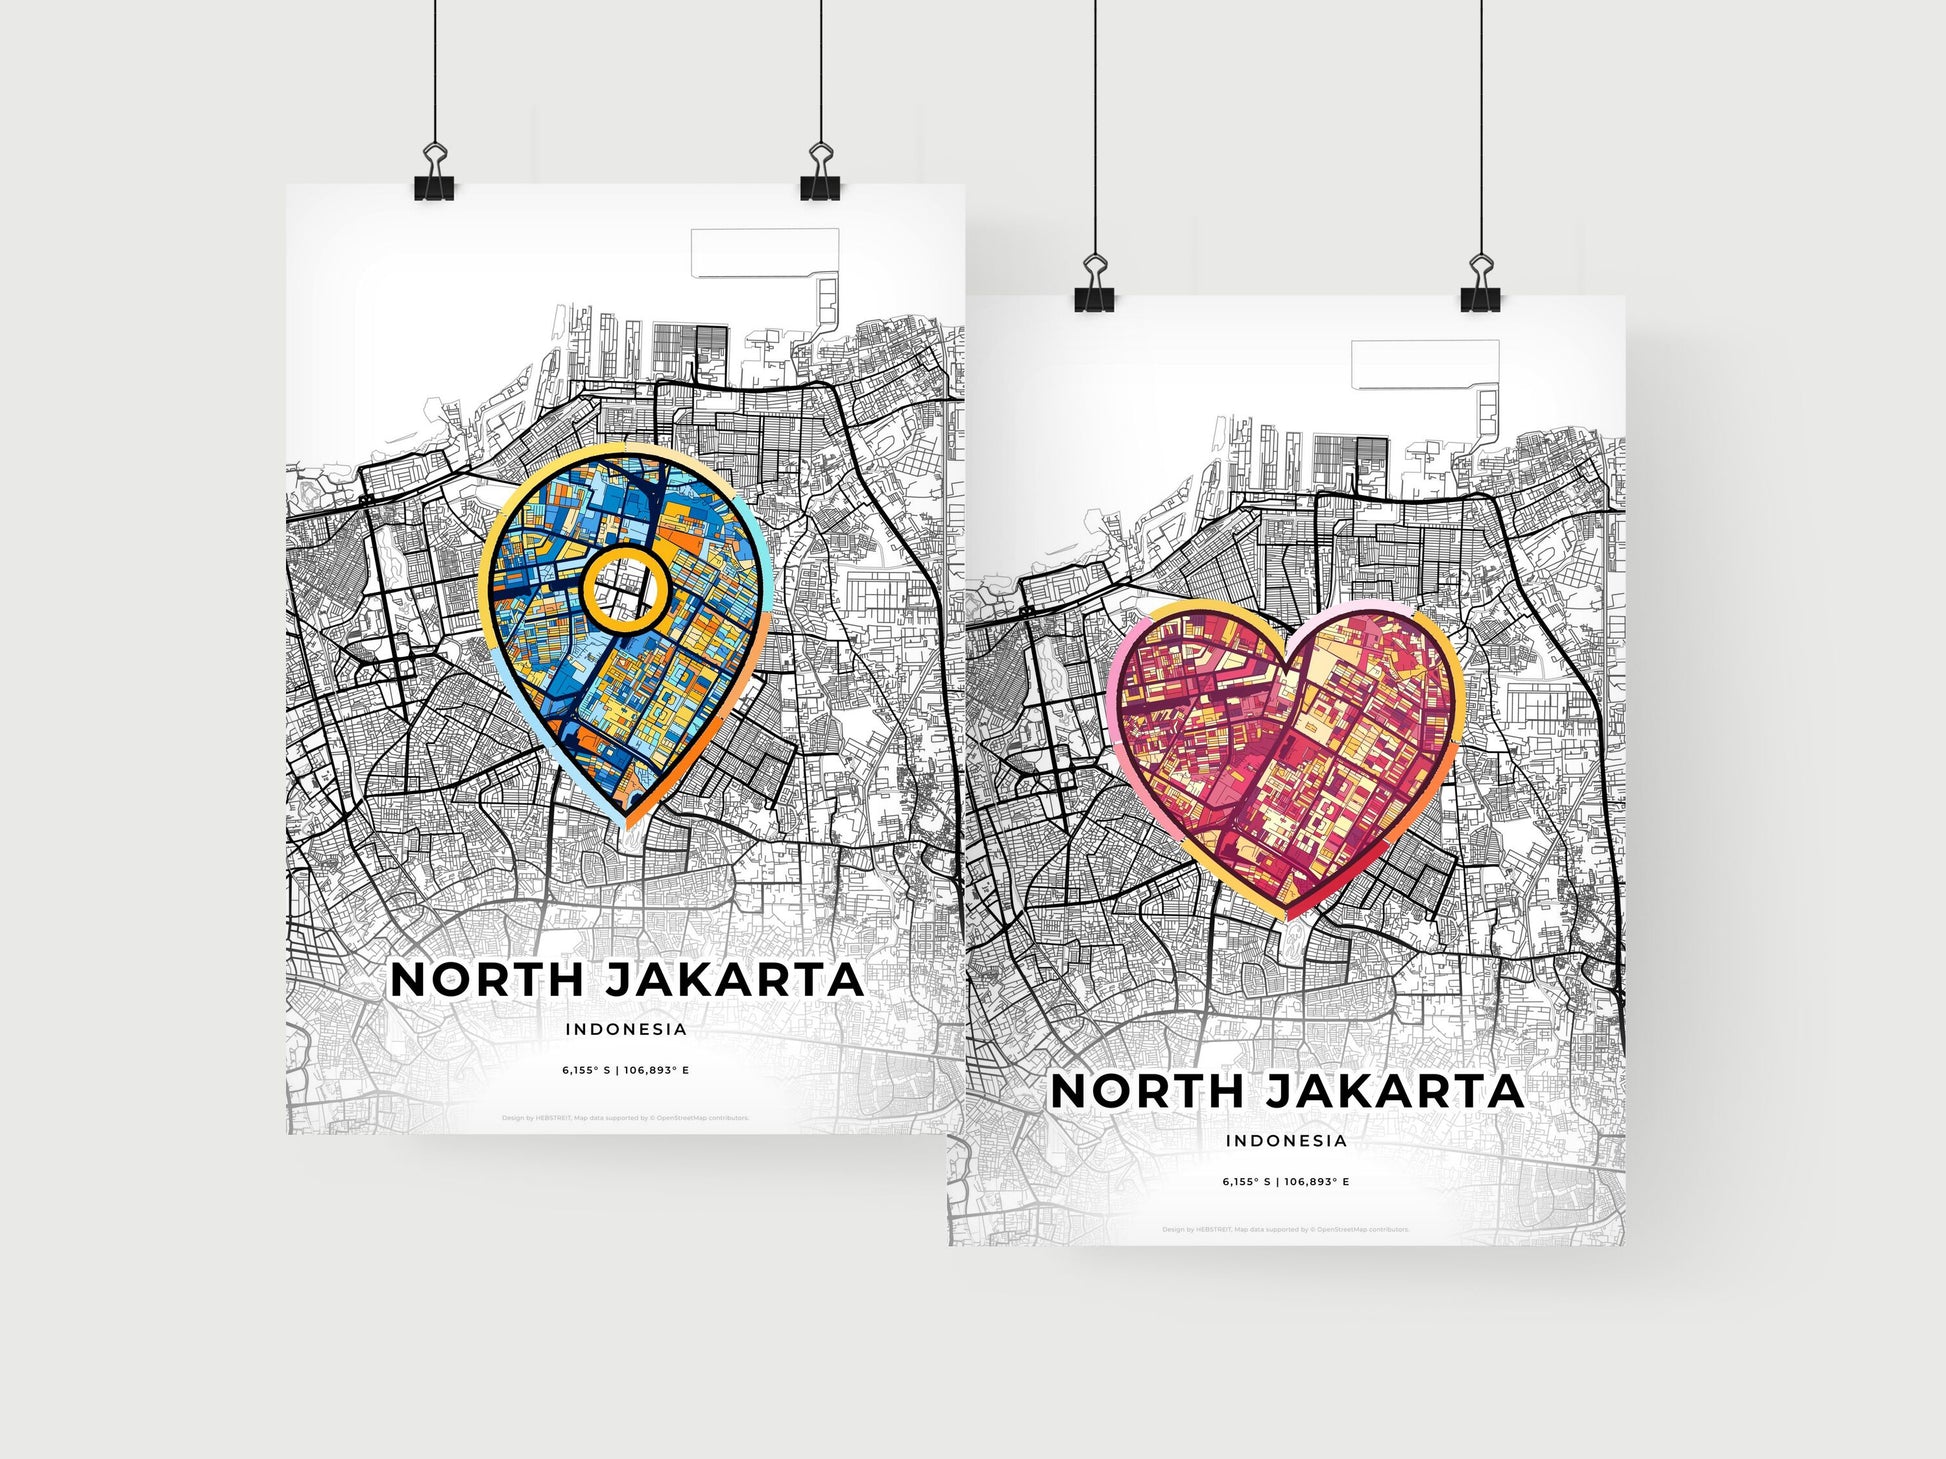 NORTH JAKARTA INDONESIA minimal art map with a colorful icon.